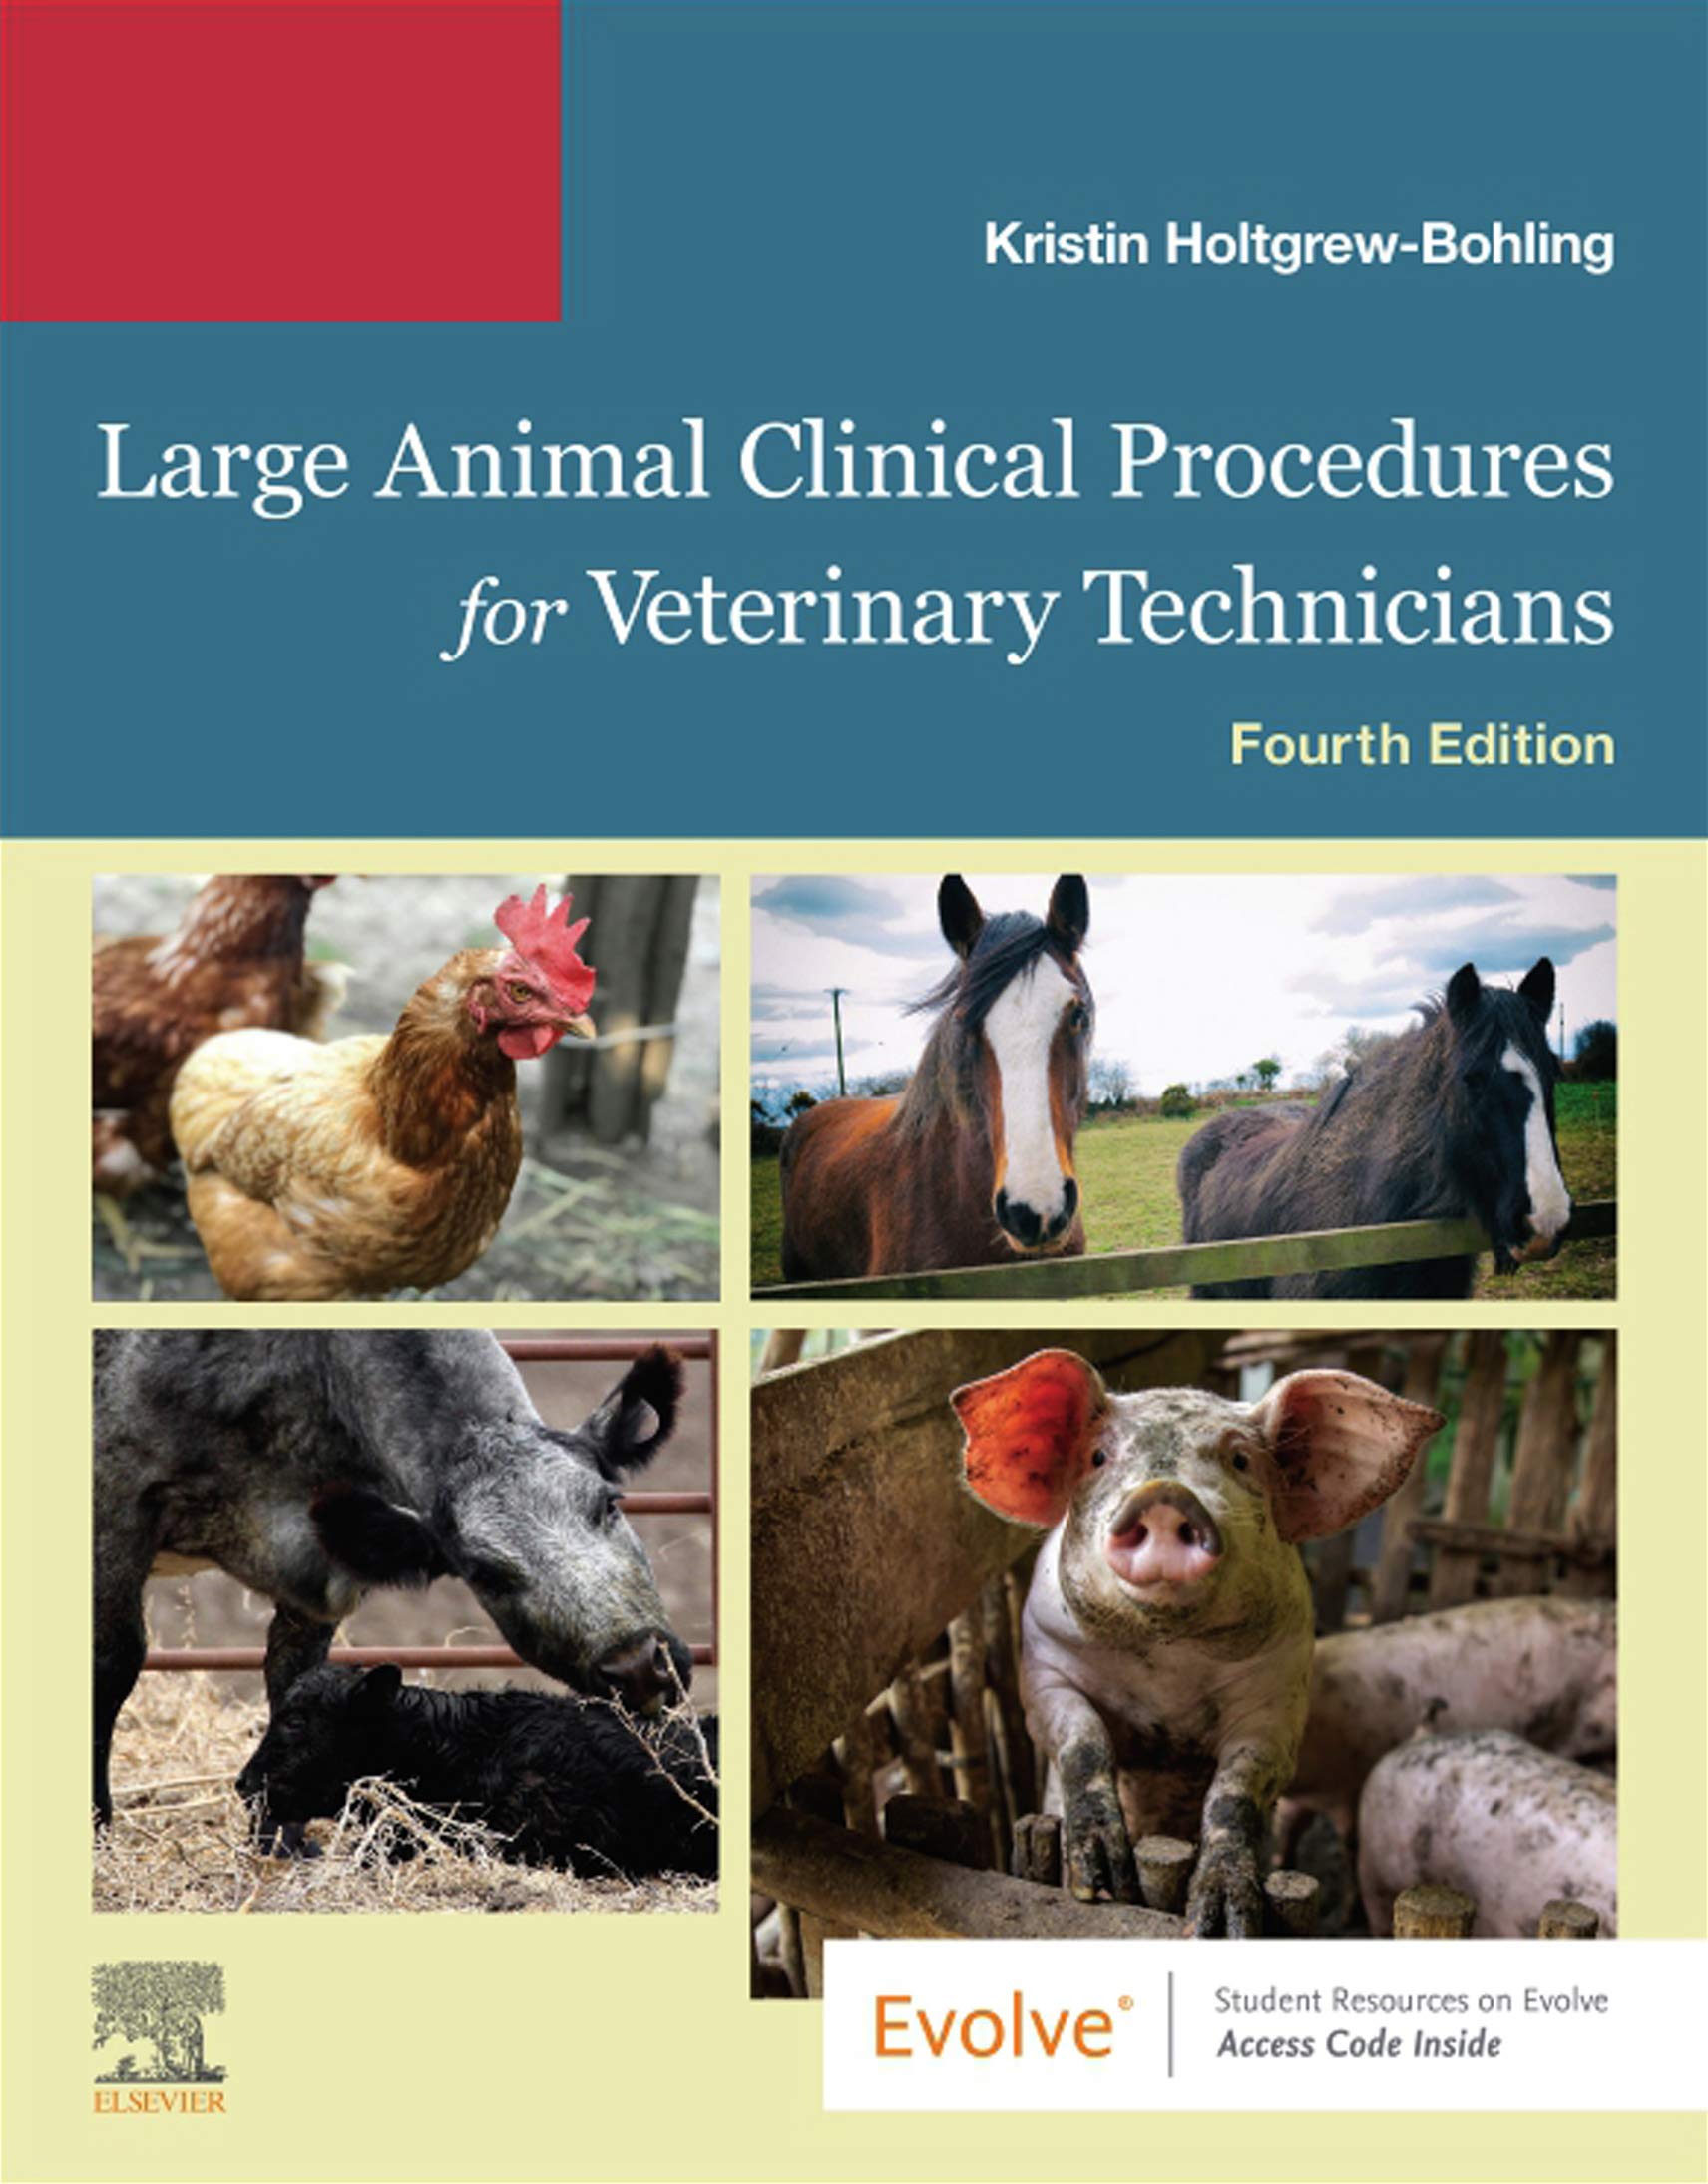 (Large Animal Clinical Procedures for Veterinary Technicians, 4th Edition(Kristin Holtgrew-Bohling